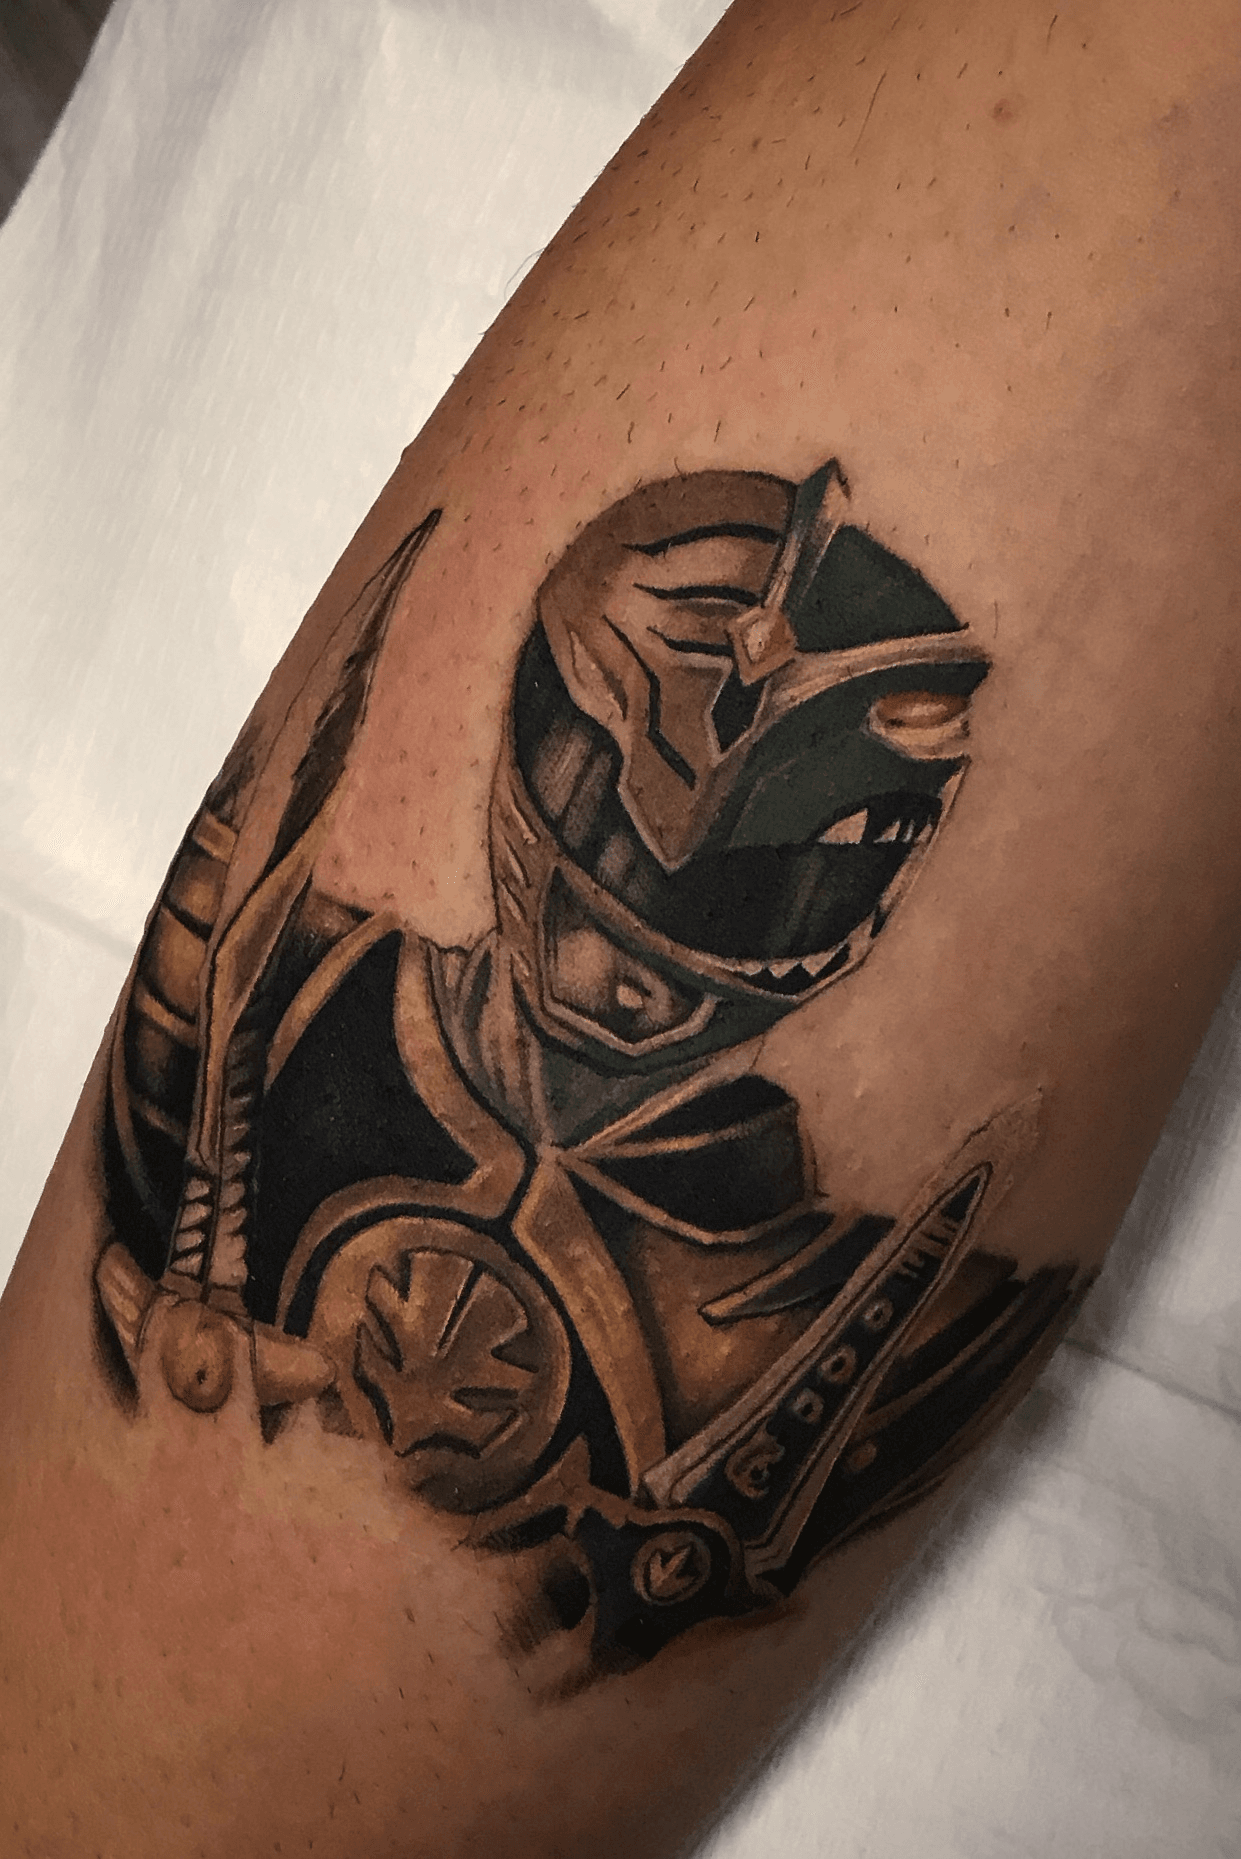 Youngbloods Tattoo Studio  Green Power Ranger by Jackson   DM or call  for all enquiries 089592 1518   jacksonmaytattooist  jacksonmaytattooist jacksonmaytattooist   colourtattoos  tattoostudio tattoostagram tattoo tattoos 